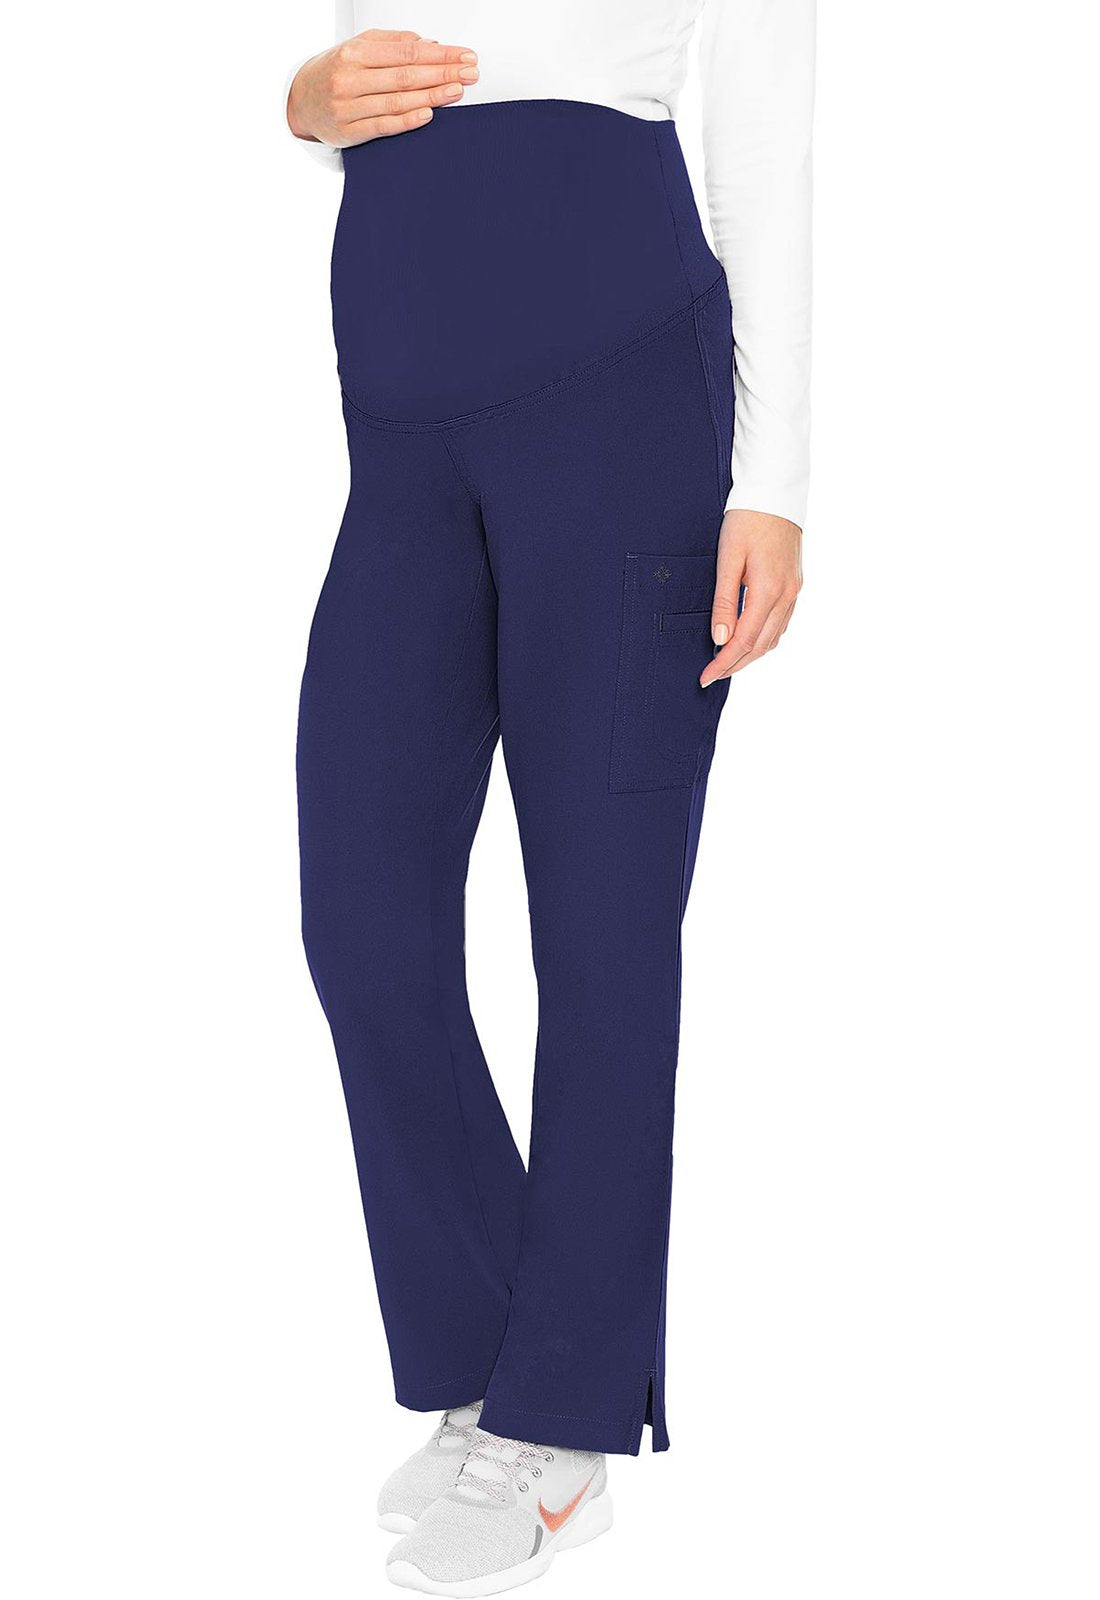 Med Couture MC Touch Navy / 3XL MC Touch  Maternity Pant Scrub MC028